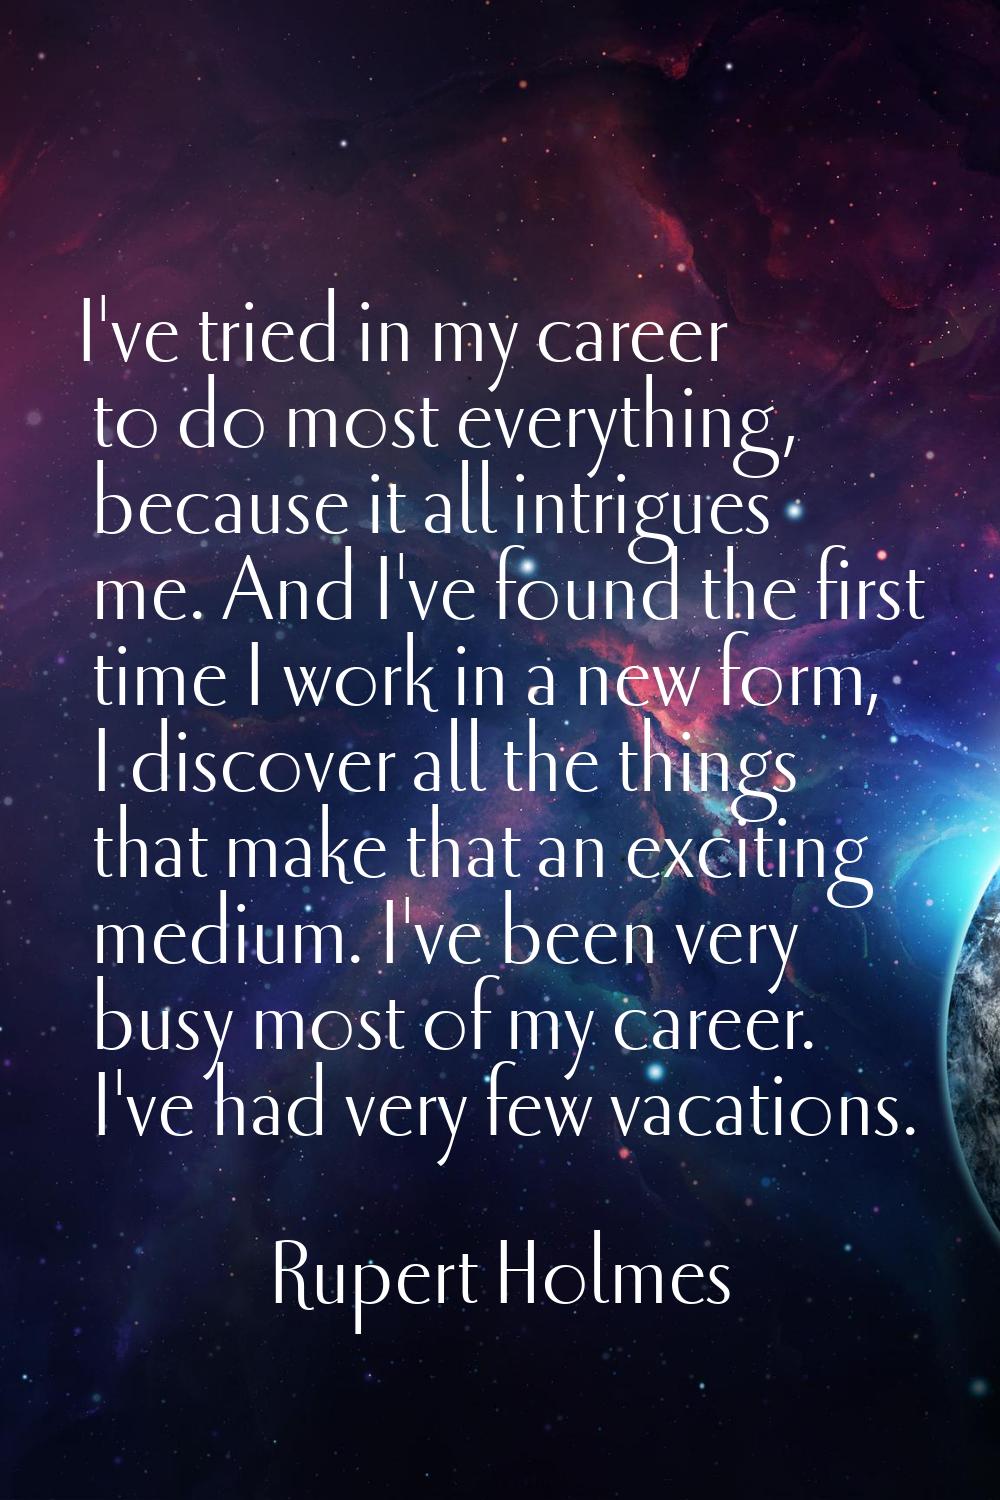 I've tried in my career to do most everything, because it all intrigues me. And I've found the firs